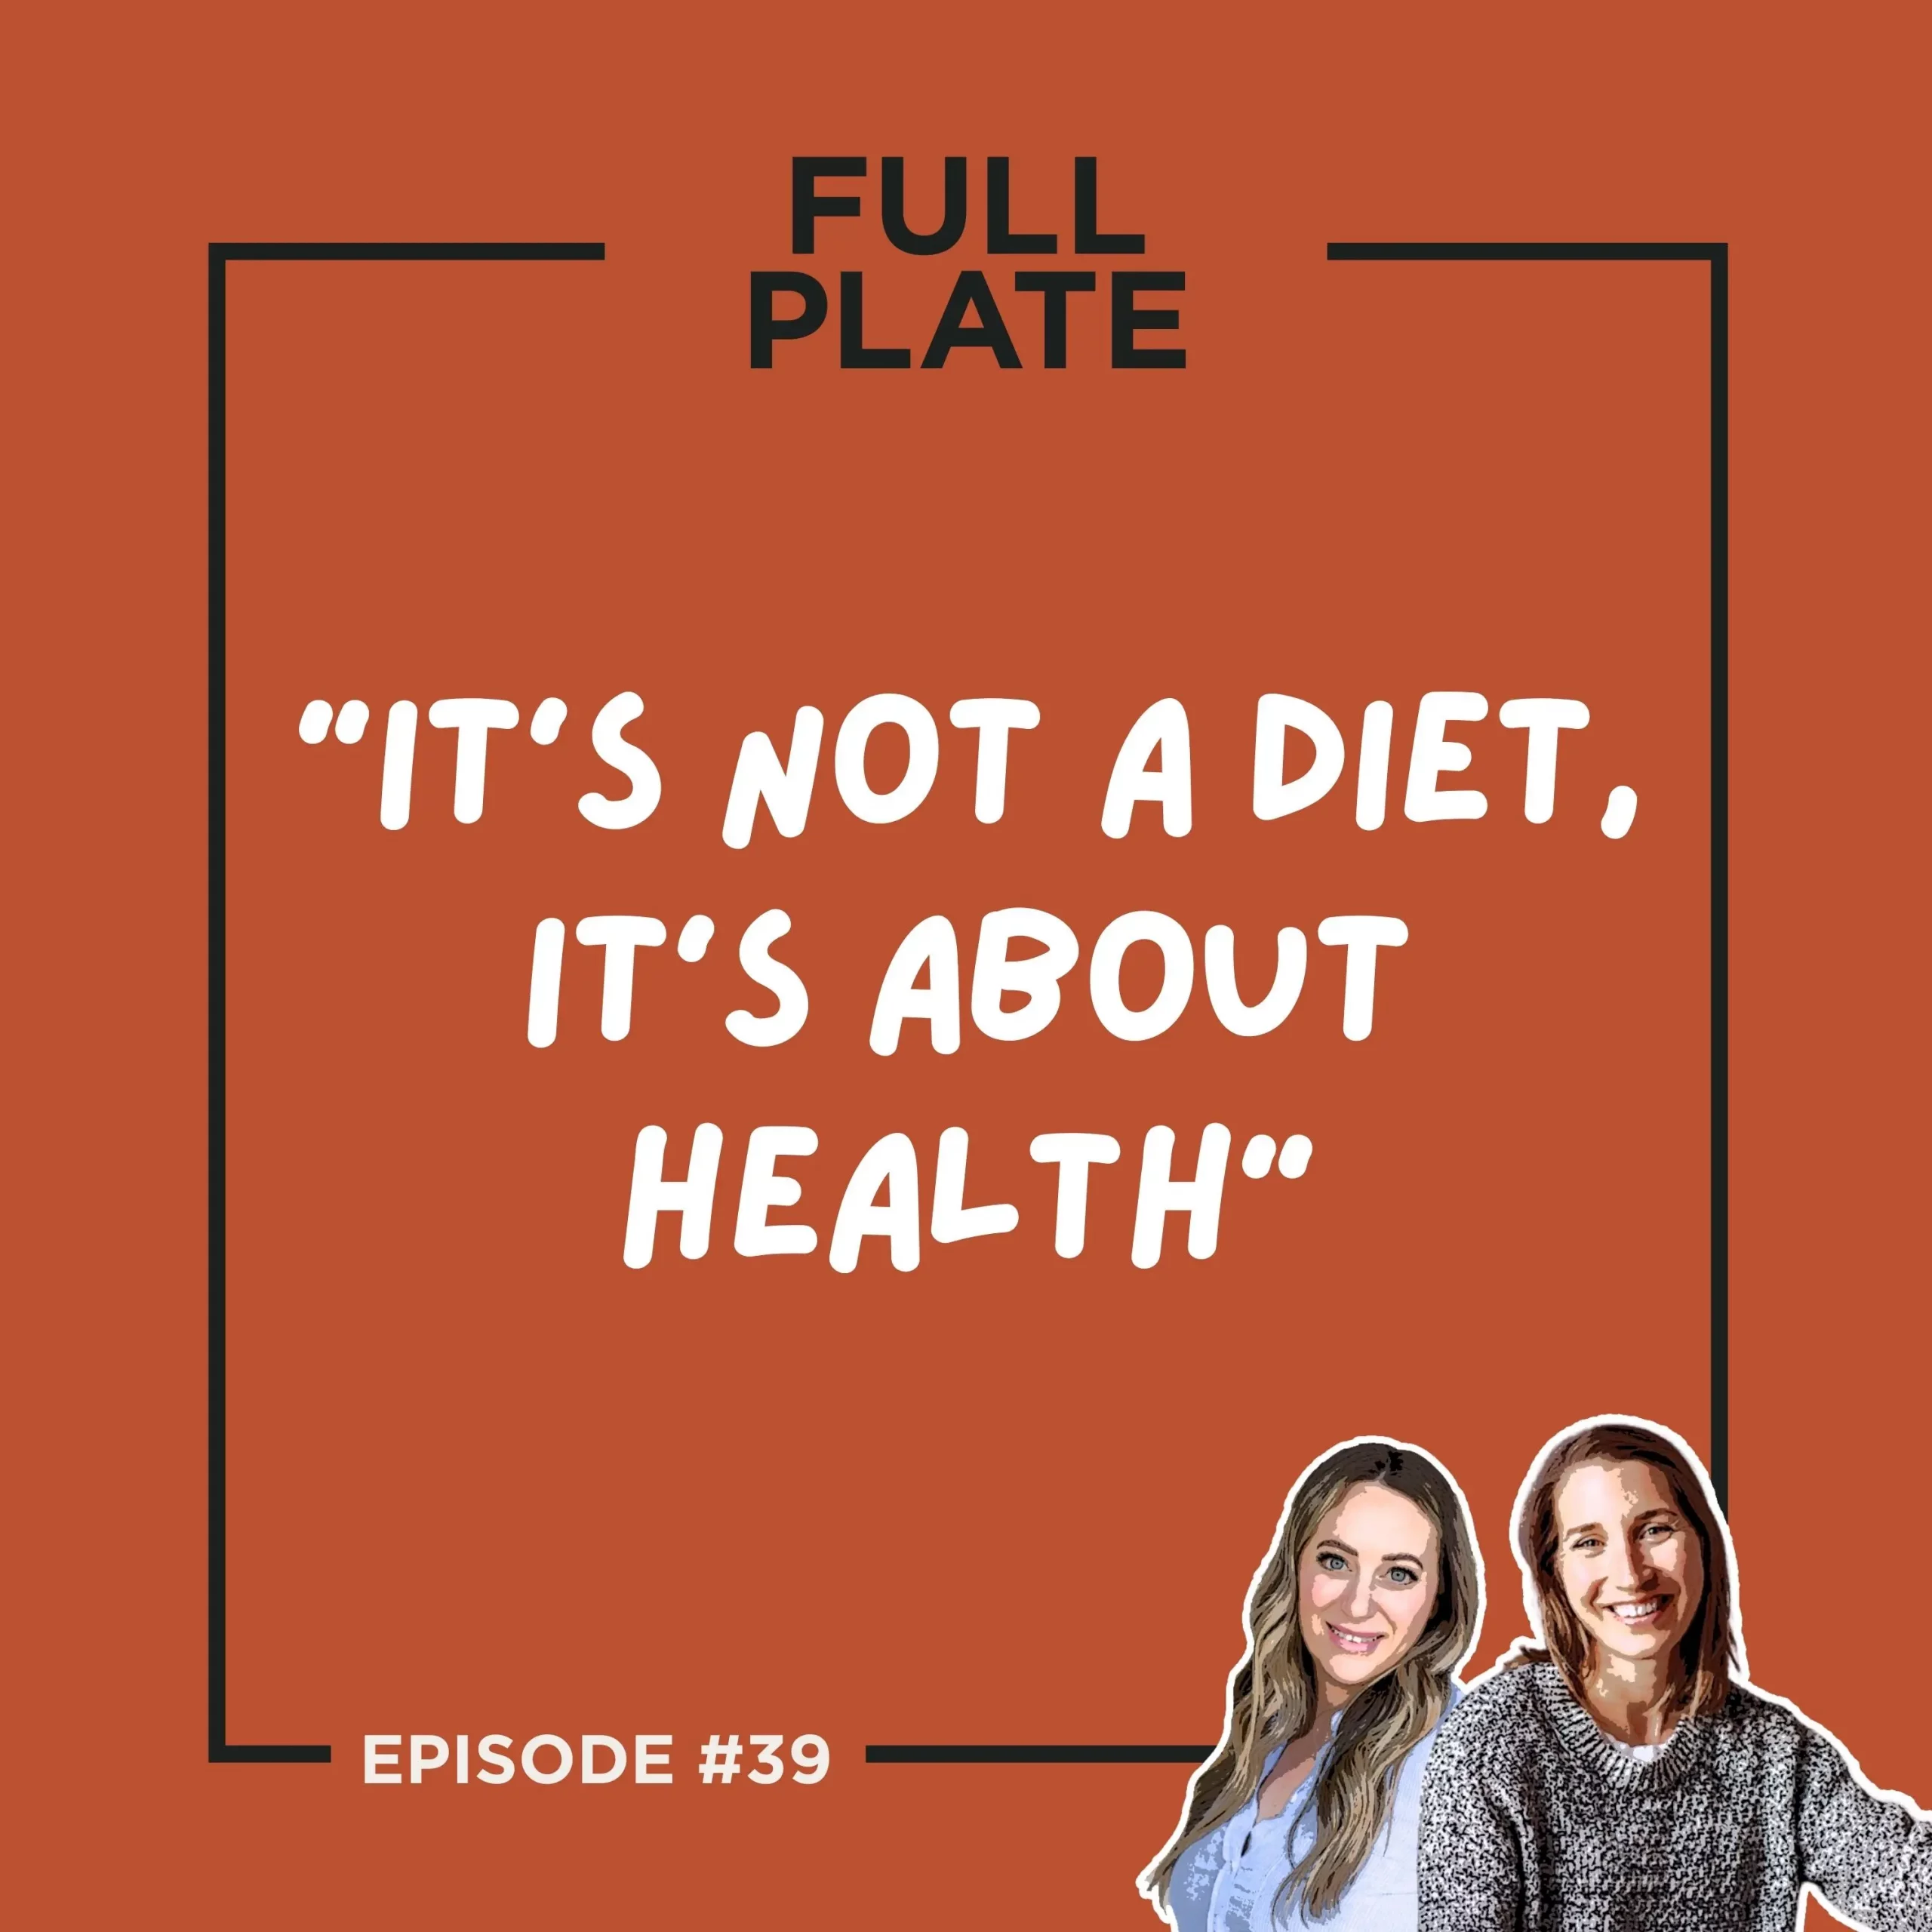 Full Plate Podcast | Ditch diet culture, respect your body, and set boundaries | Episode 39: "It's Not a Diet, It's About Health"